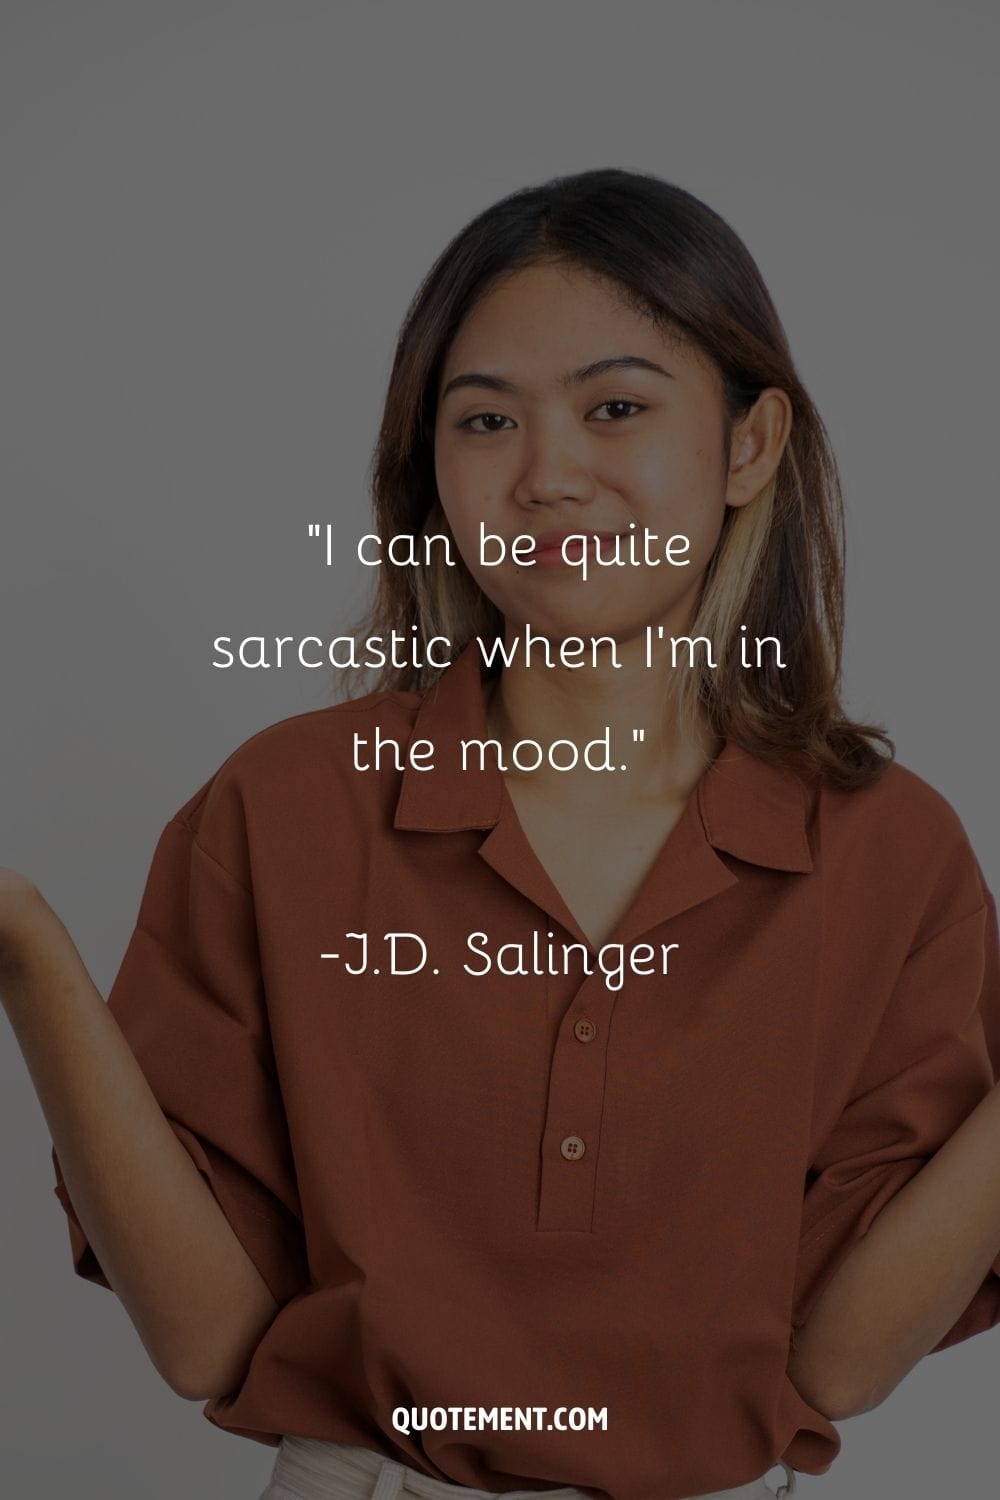 “I can be quite sarcastic when I'm in the mood.” ― J.D. Salinger, The Catcher in the Rye